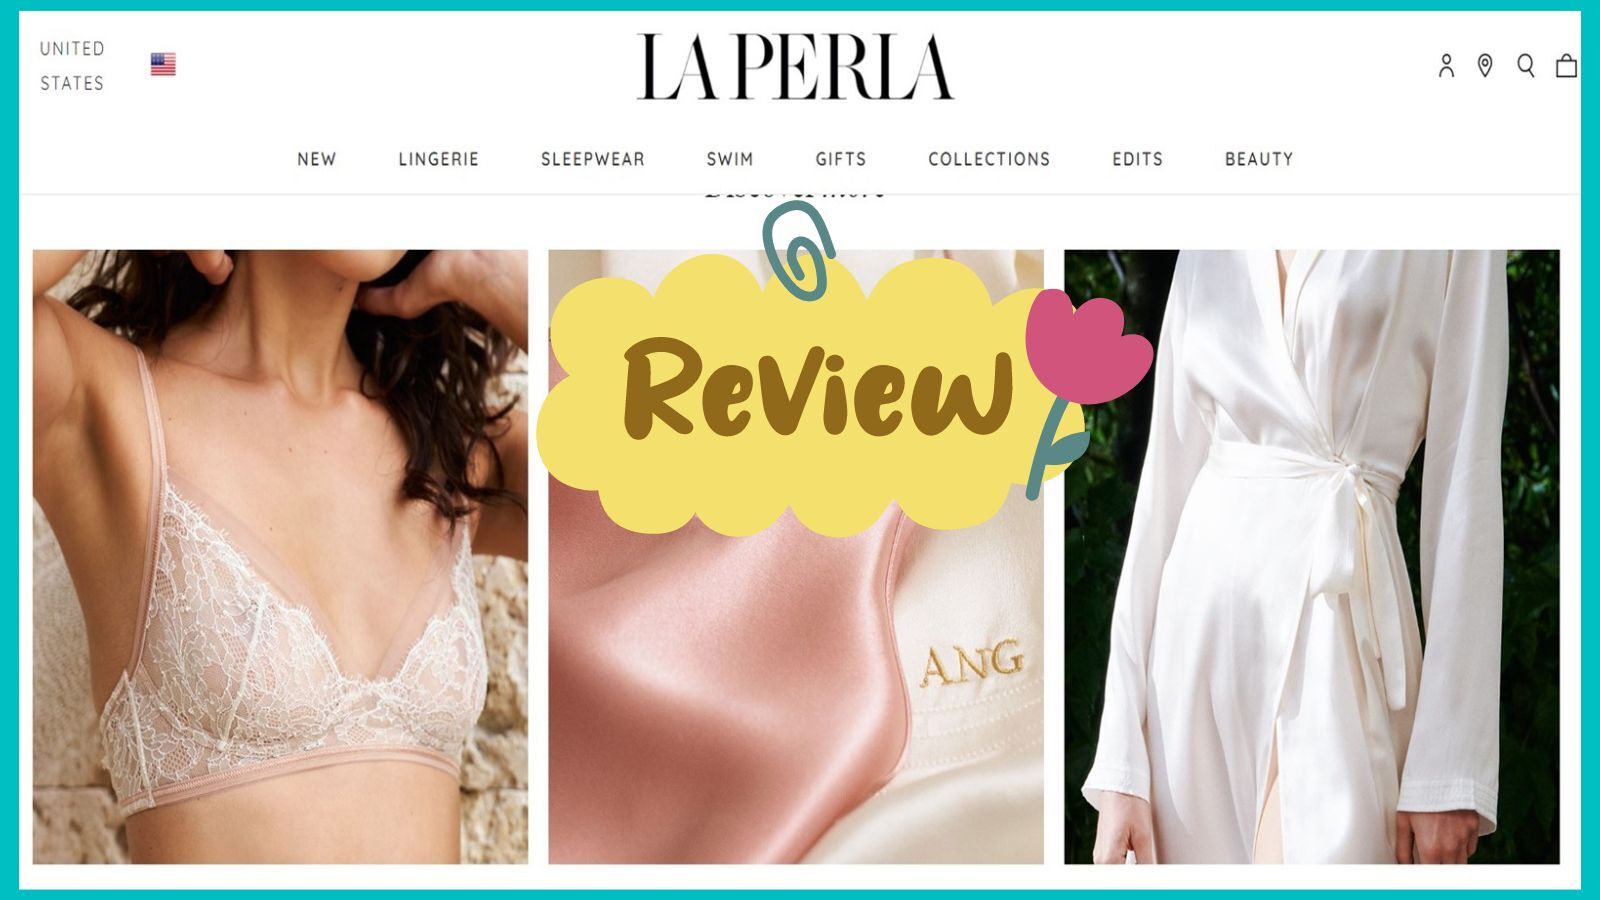 La Perla Lingerie Review: Is This Luxury Brand Worth the Price?